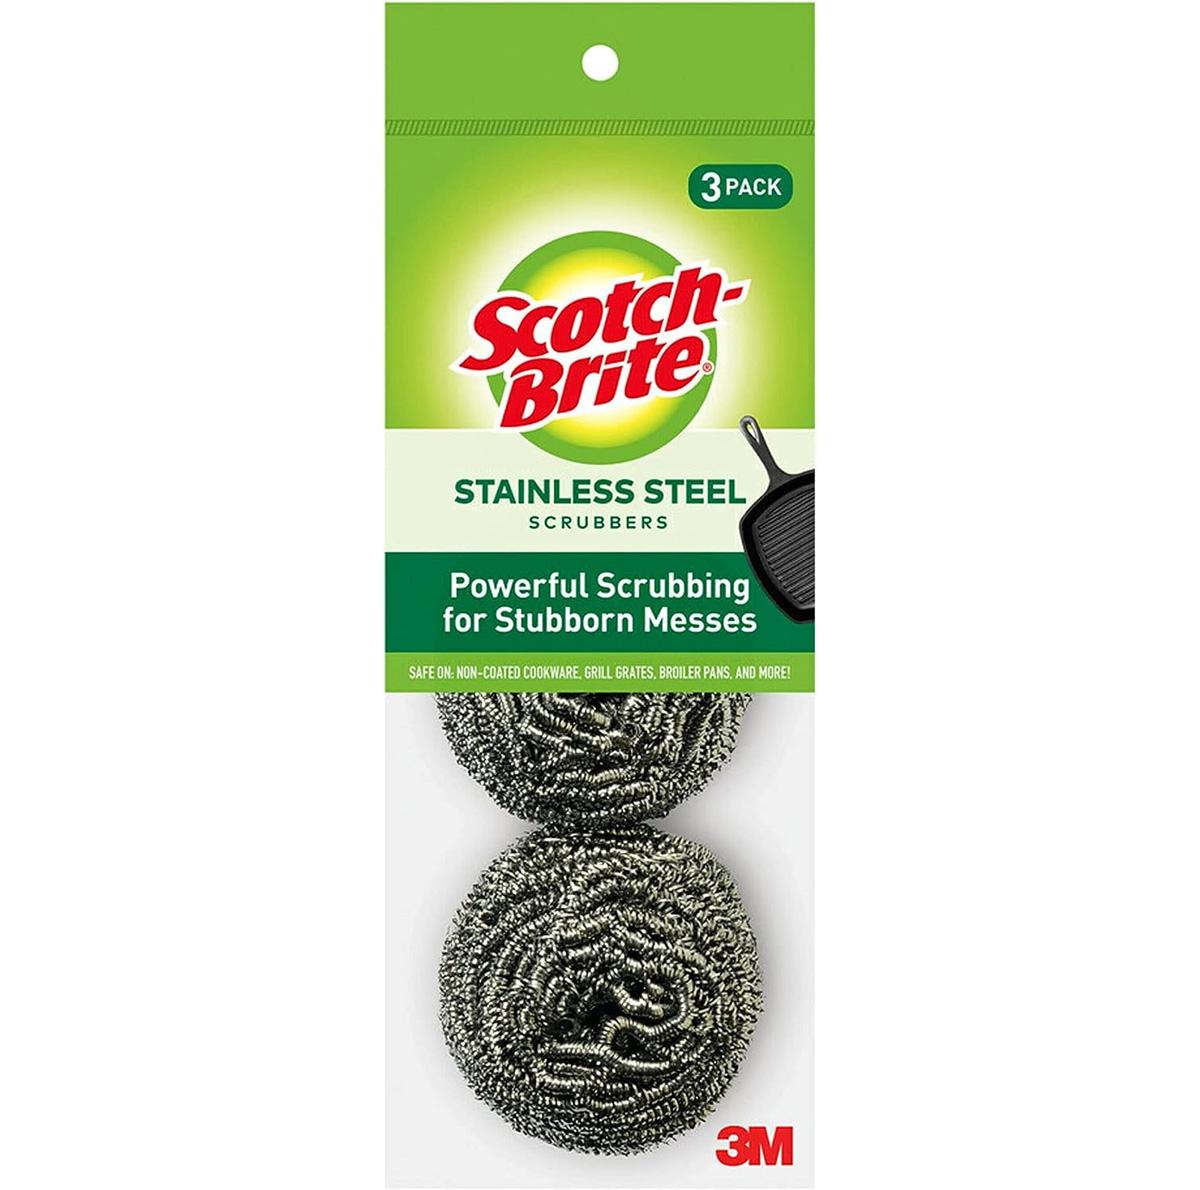 Scotch-Brite Stainless Steel Scrubbers for $1.67 Shipped